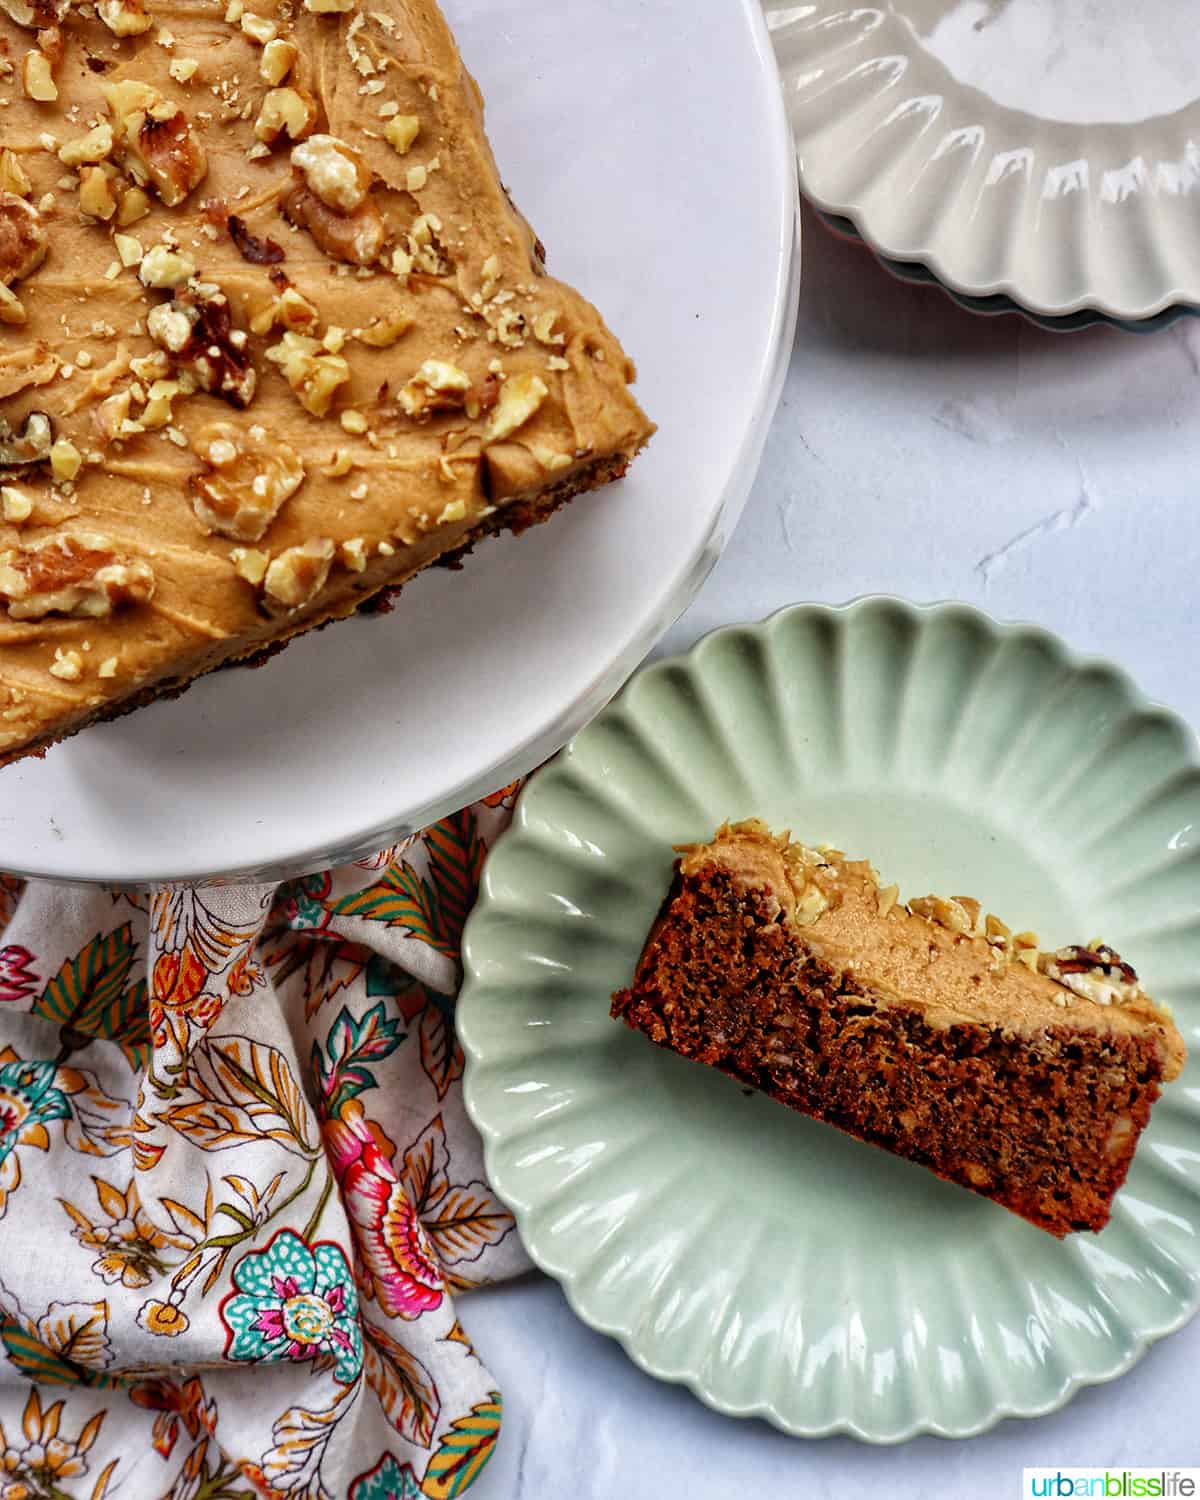 slice of coffee walnut loaf on a green plate next to a whole coffee walnut loaf on a cake pedestal.